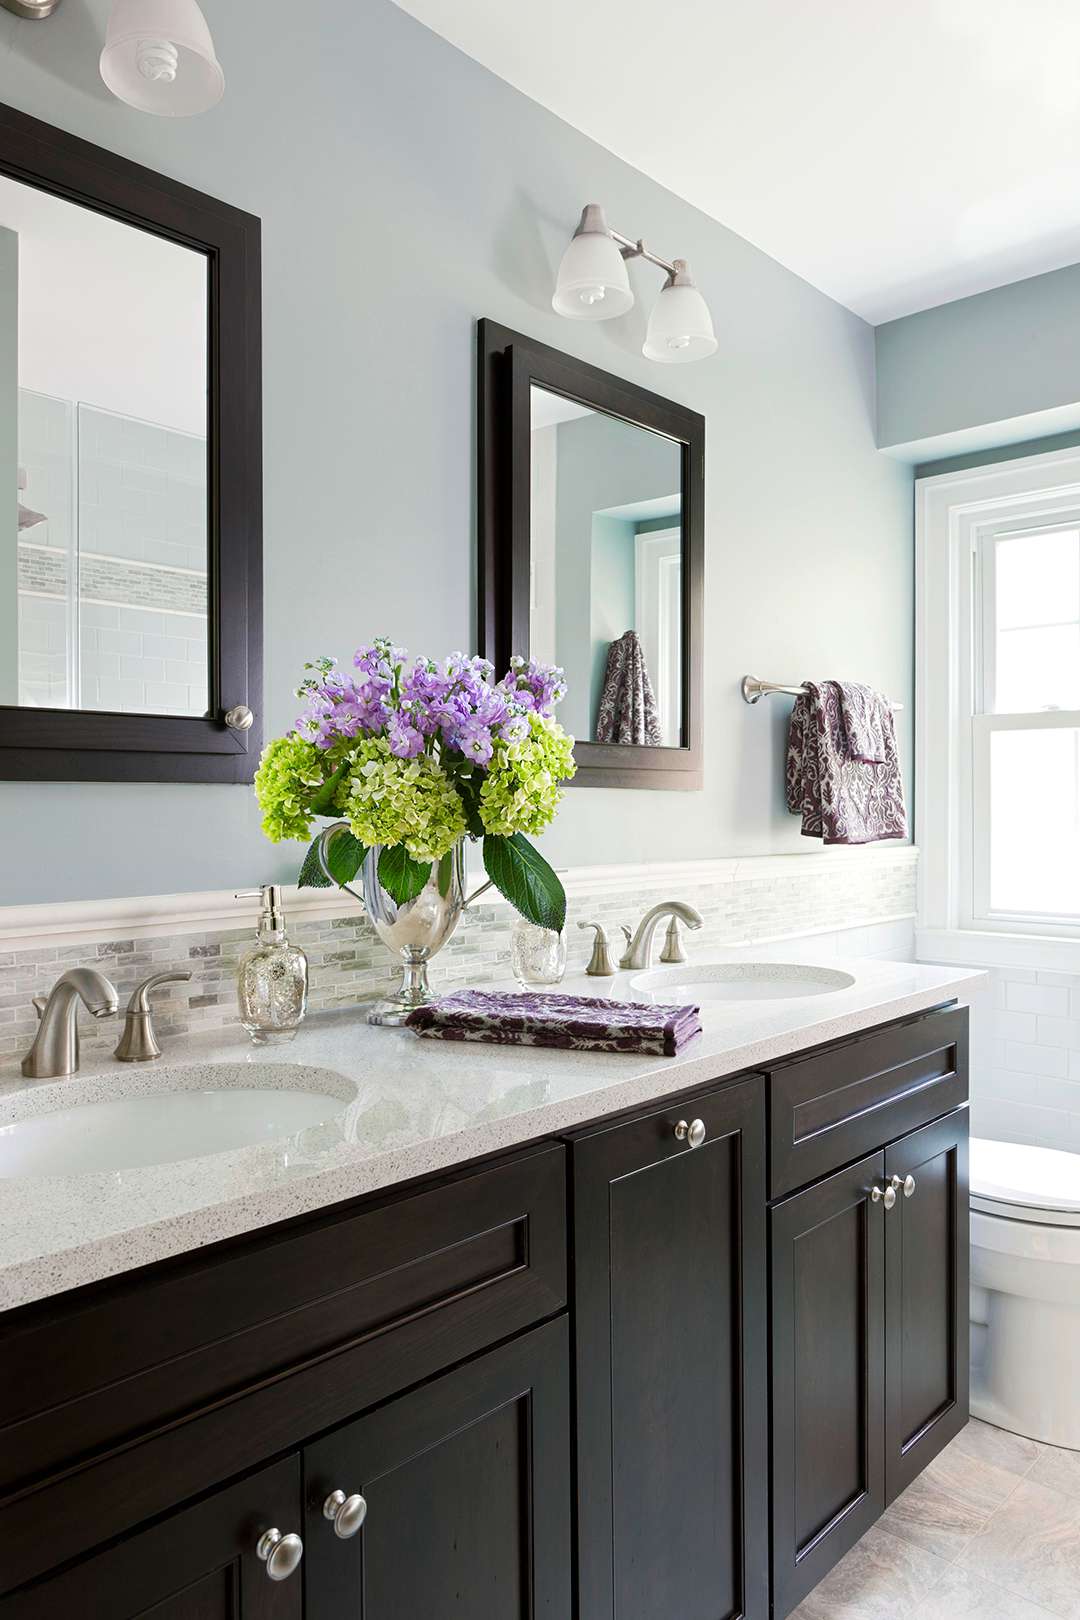 12 Popular Bathroom Paint Colors Our Editors Swear By Better Homes Gardens,Exterior Home Painting Ideas